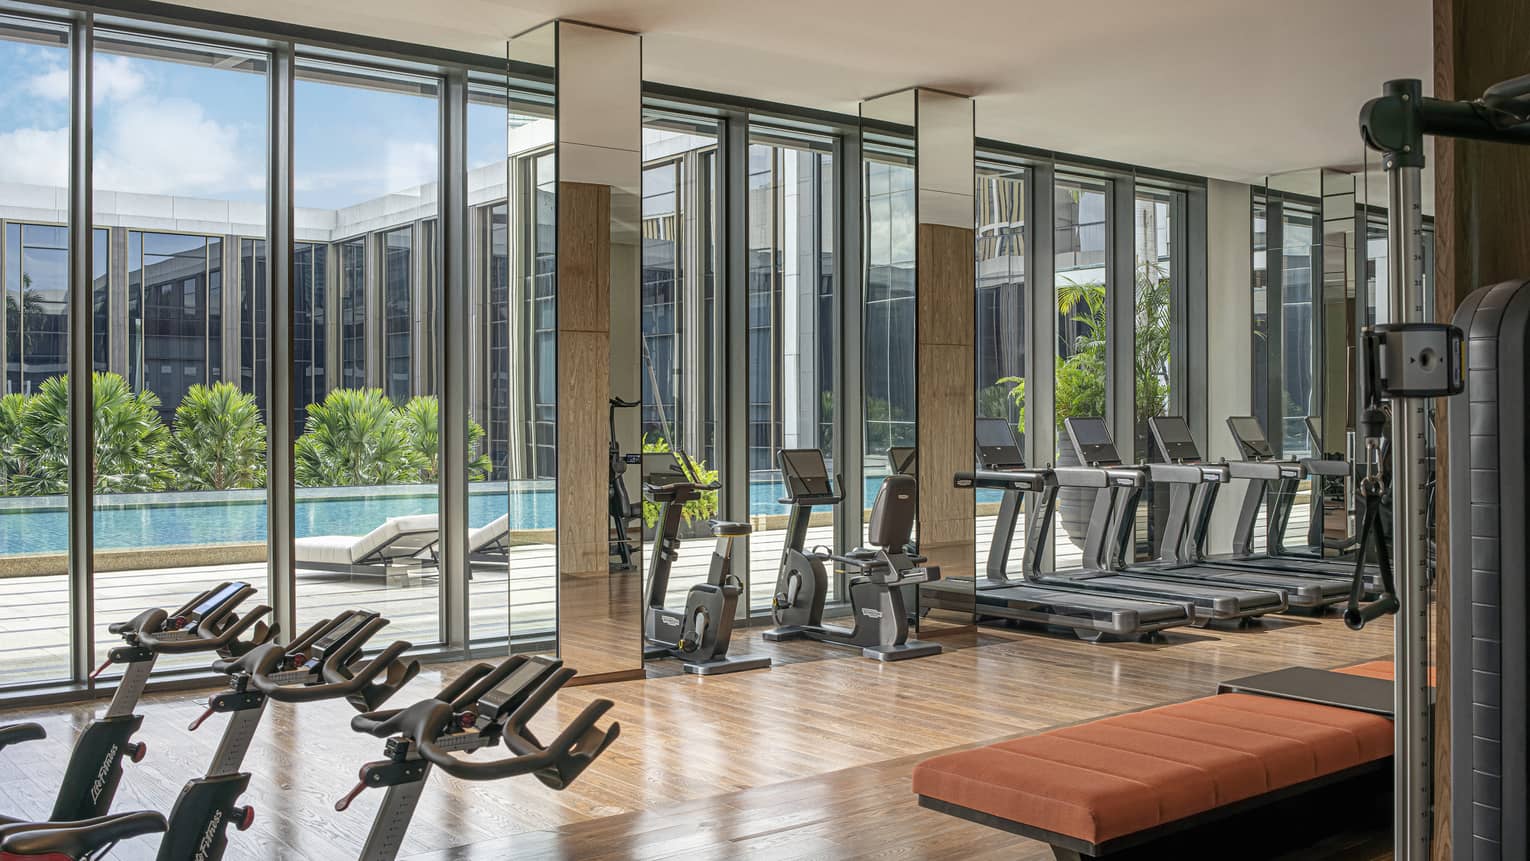 Hotel gym with floor-to-ceiling windows and rows of exercise equipment, natural light, pool views